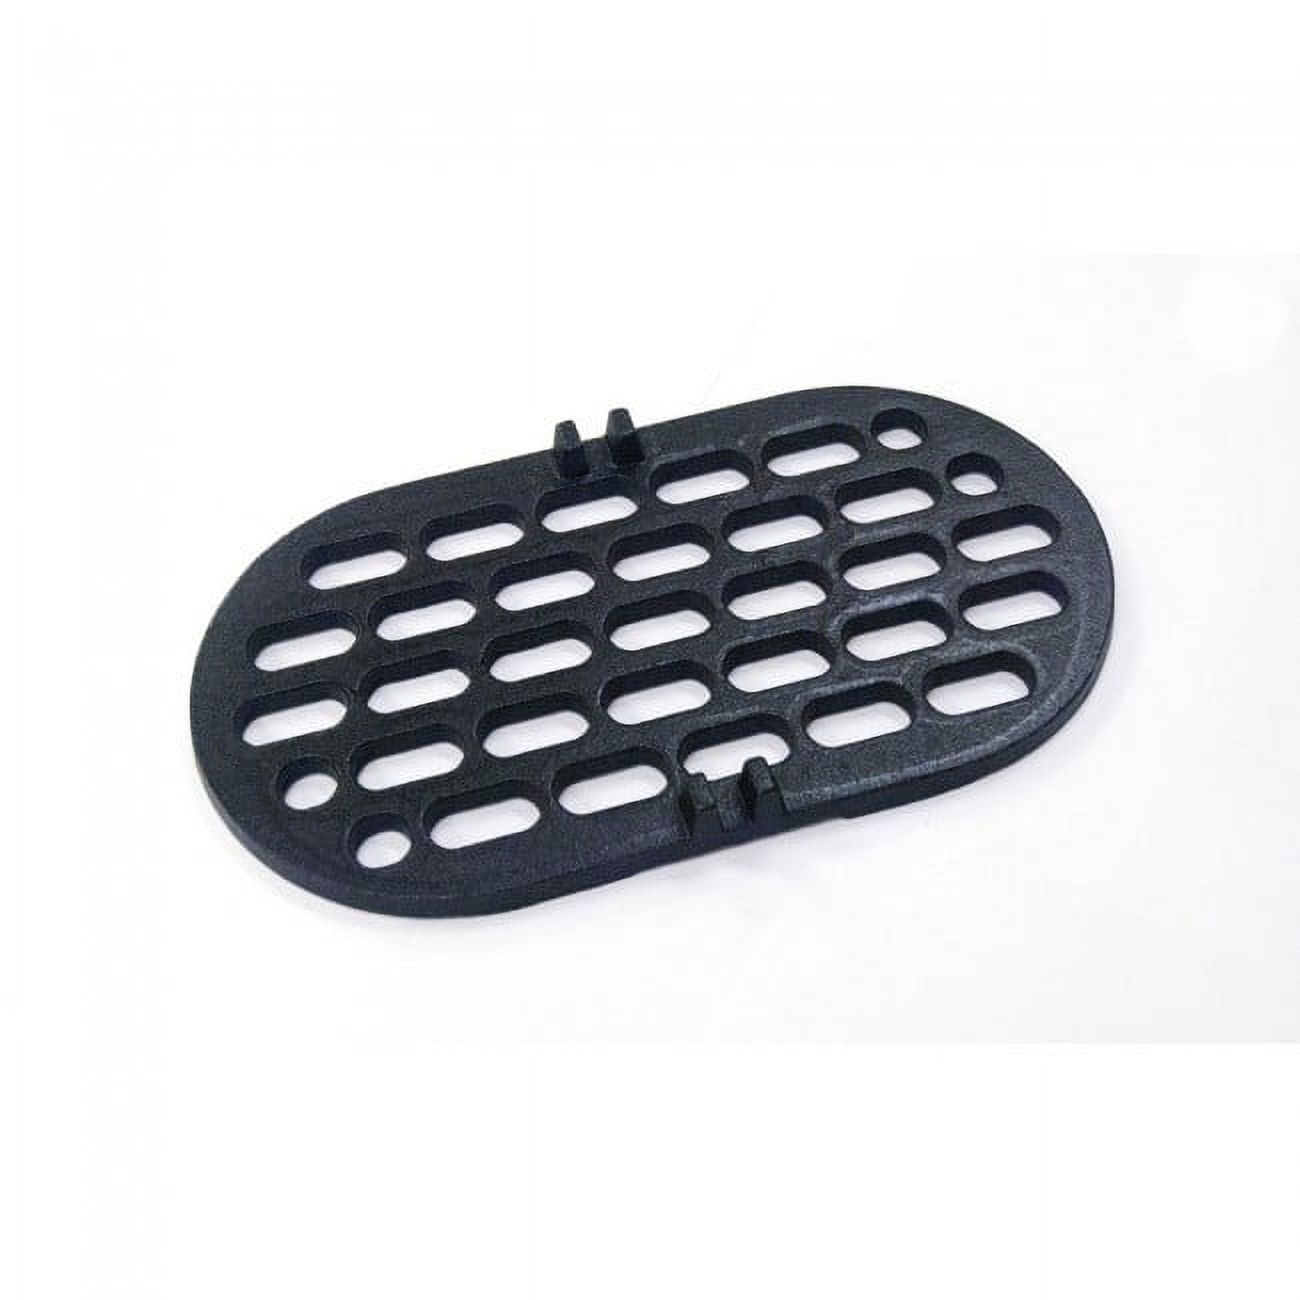 Primo Cast Iron Charcoal Grate For Primo Oval Jr. 200 Grills OEM - image 1 of 1